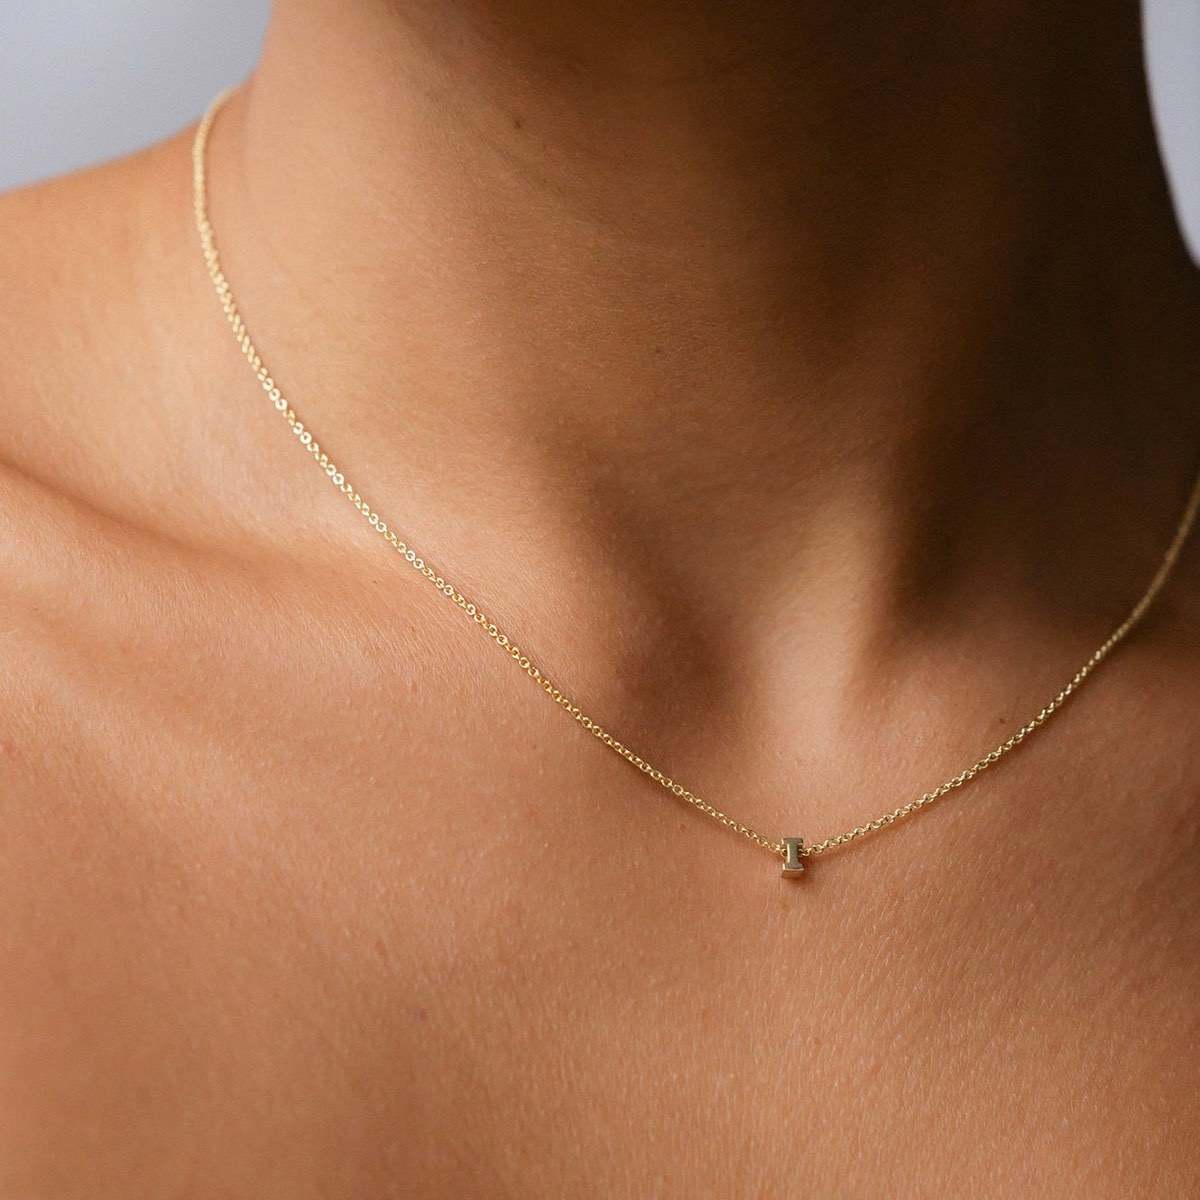 Hand finished solid gold letter necklace: Close up of a model wearing our beautiful 9ct yellow gold Tiny Letter I Charm Necklace with a 40cm cable chain